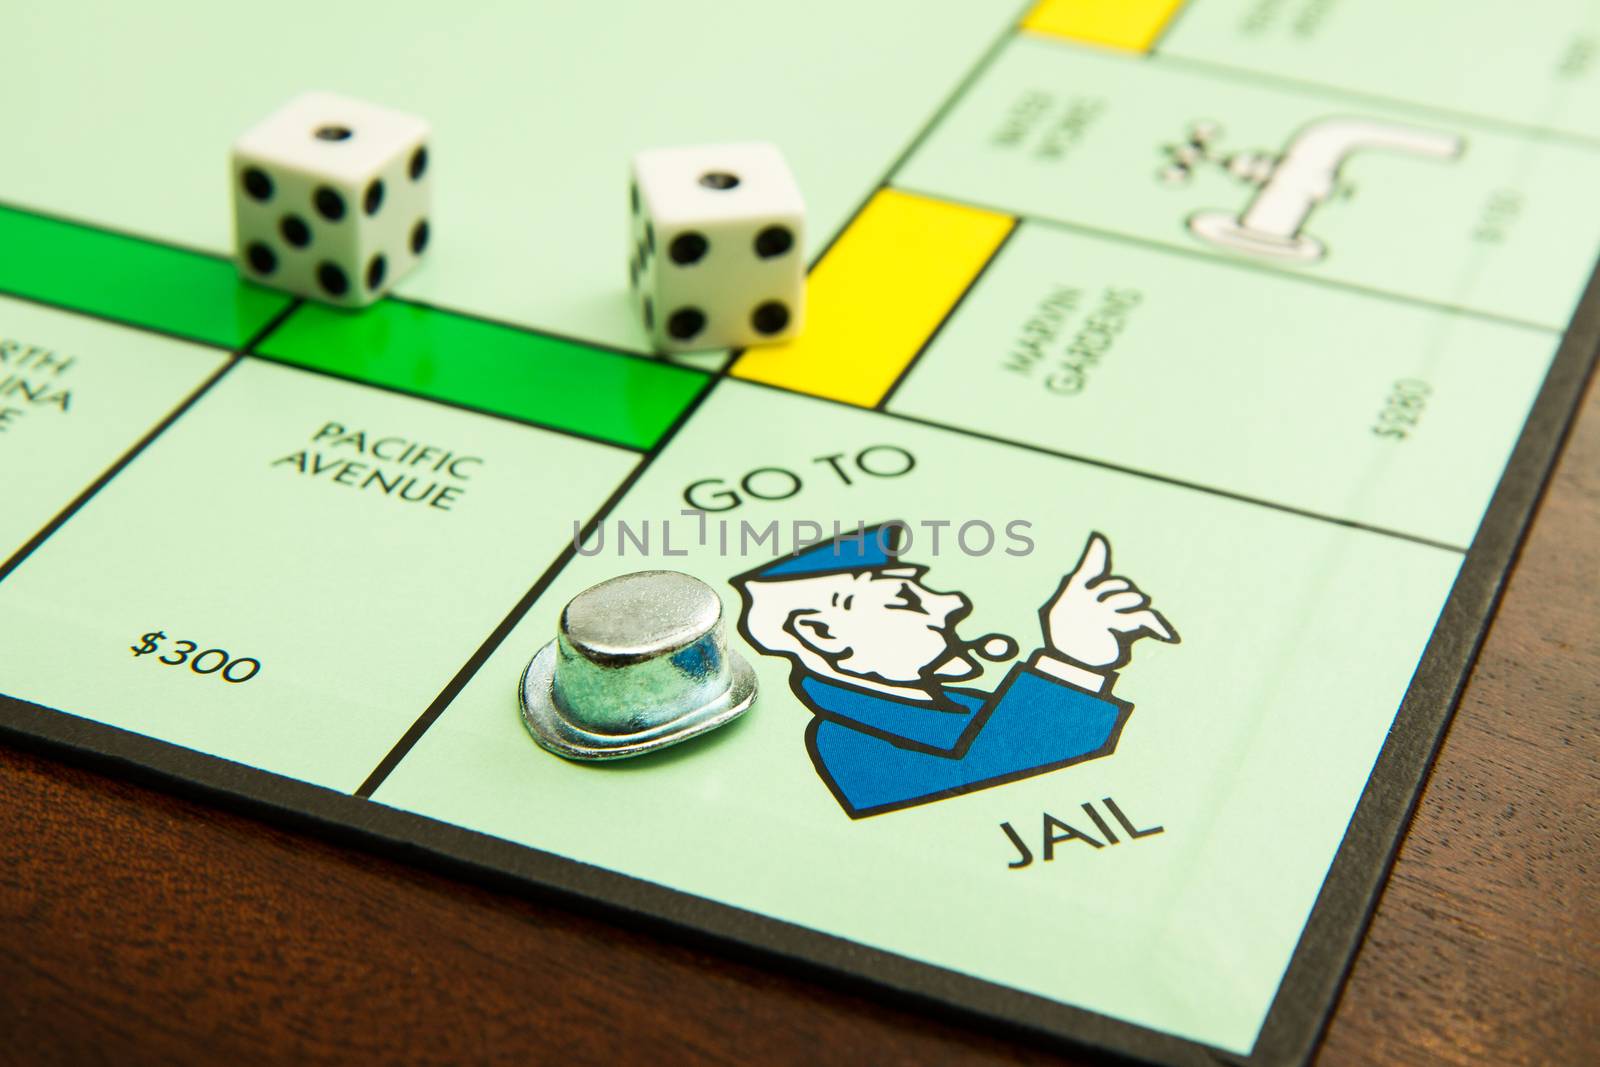 BOISE, IDAHO - NOVEMBER 18, 2012: Showing the hat on the go to jail spot on the famous Hasbro game Monopoly.